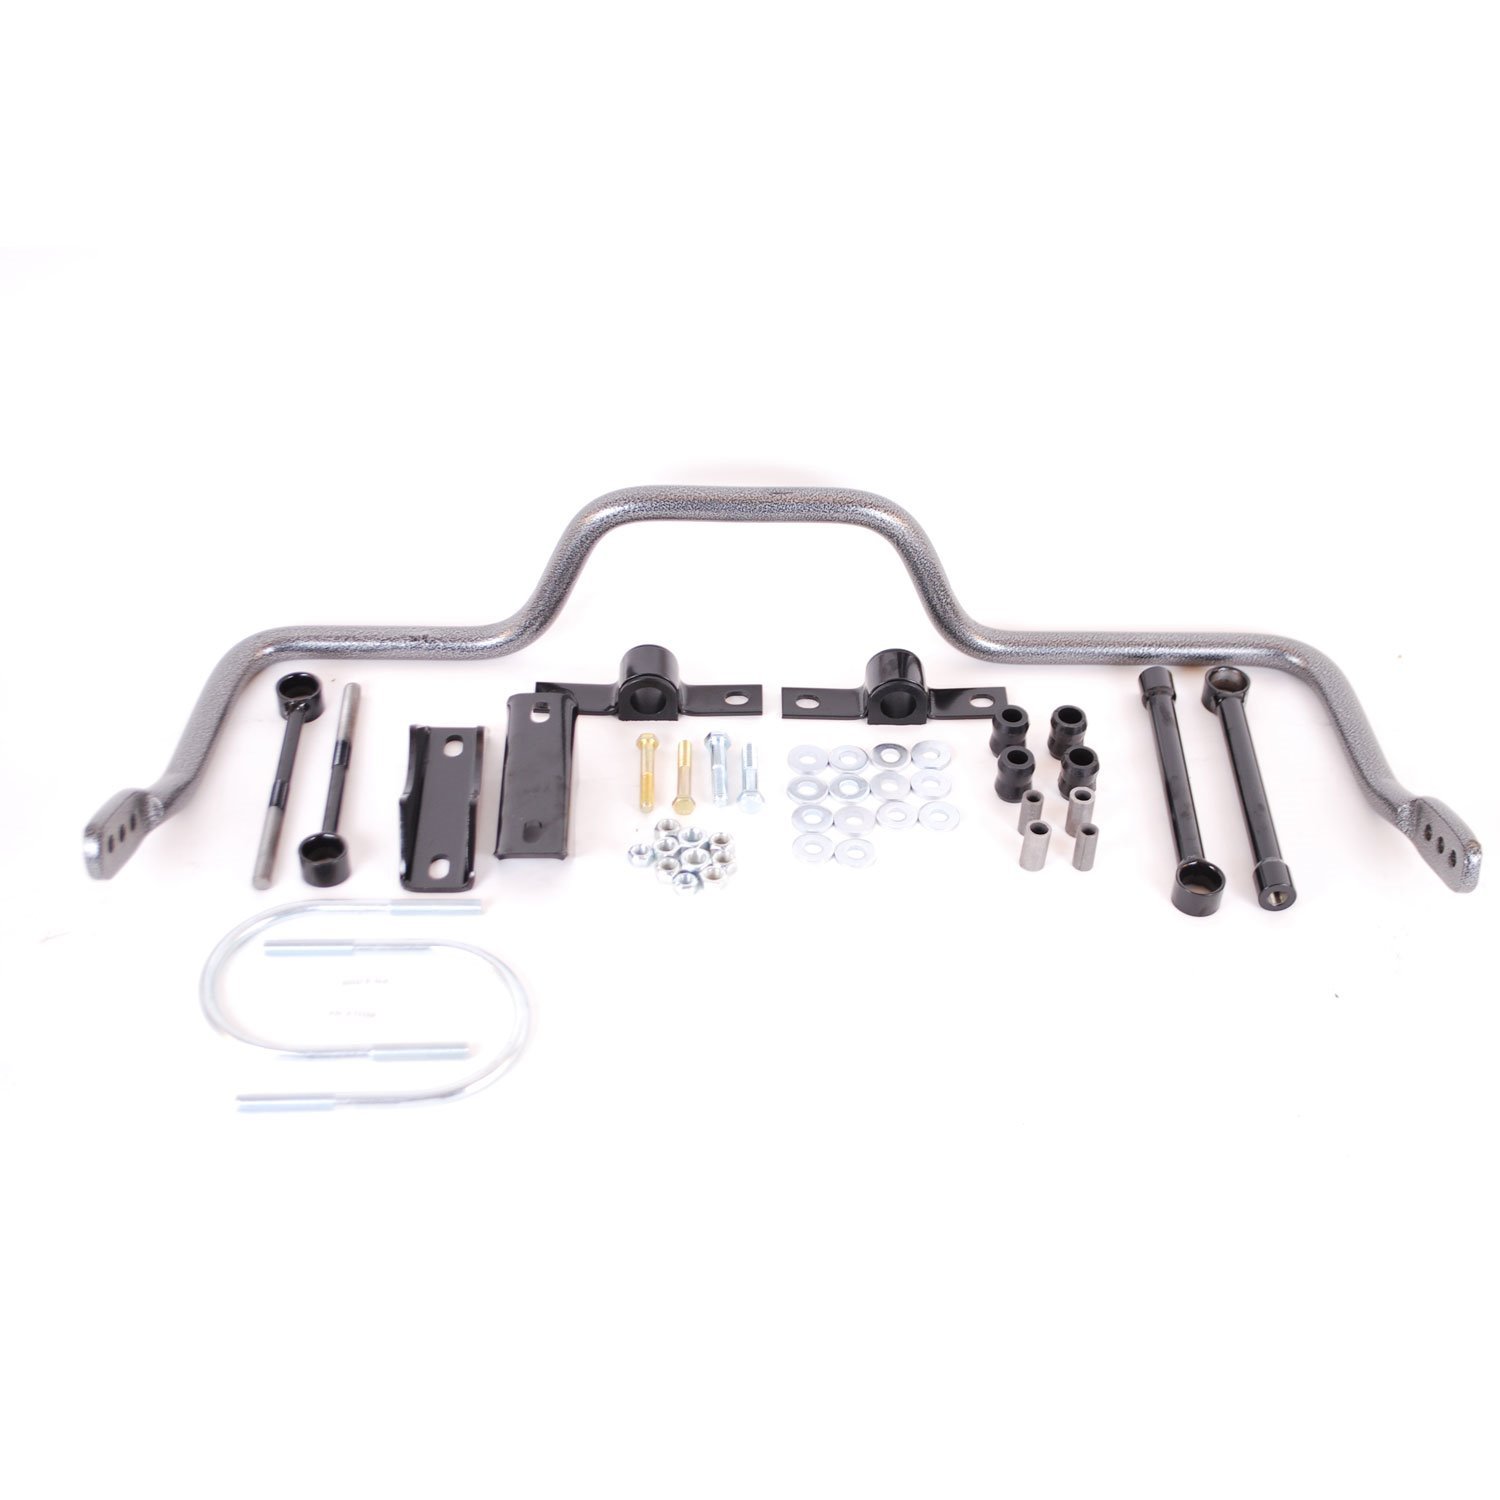 Rear Sway Bar for 2011-2016 Ford F-250/F-350 Super Duty 4WD with Single Rear Wheels and 2"-4" Rear Lift